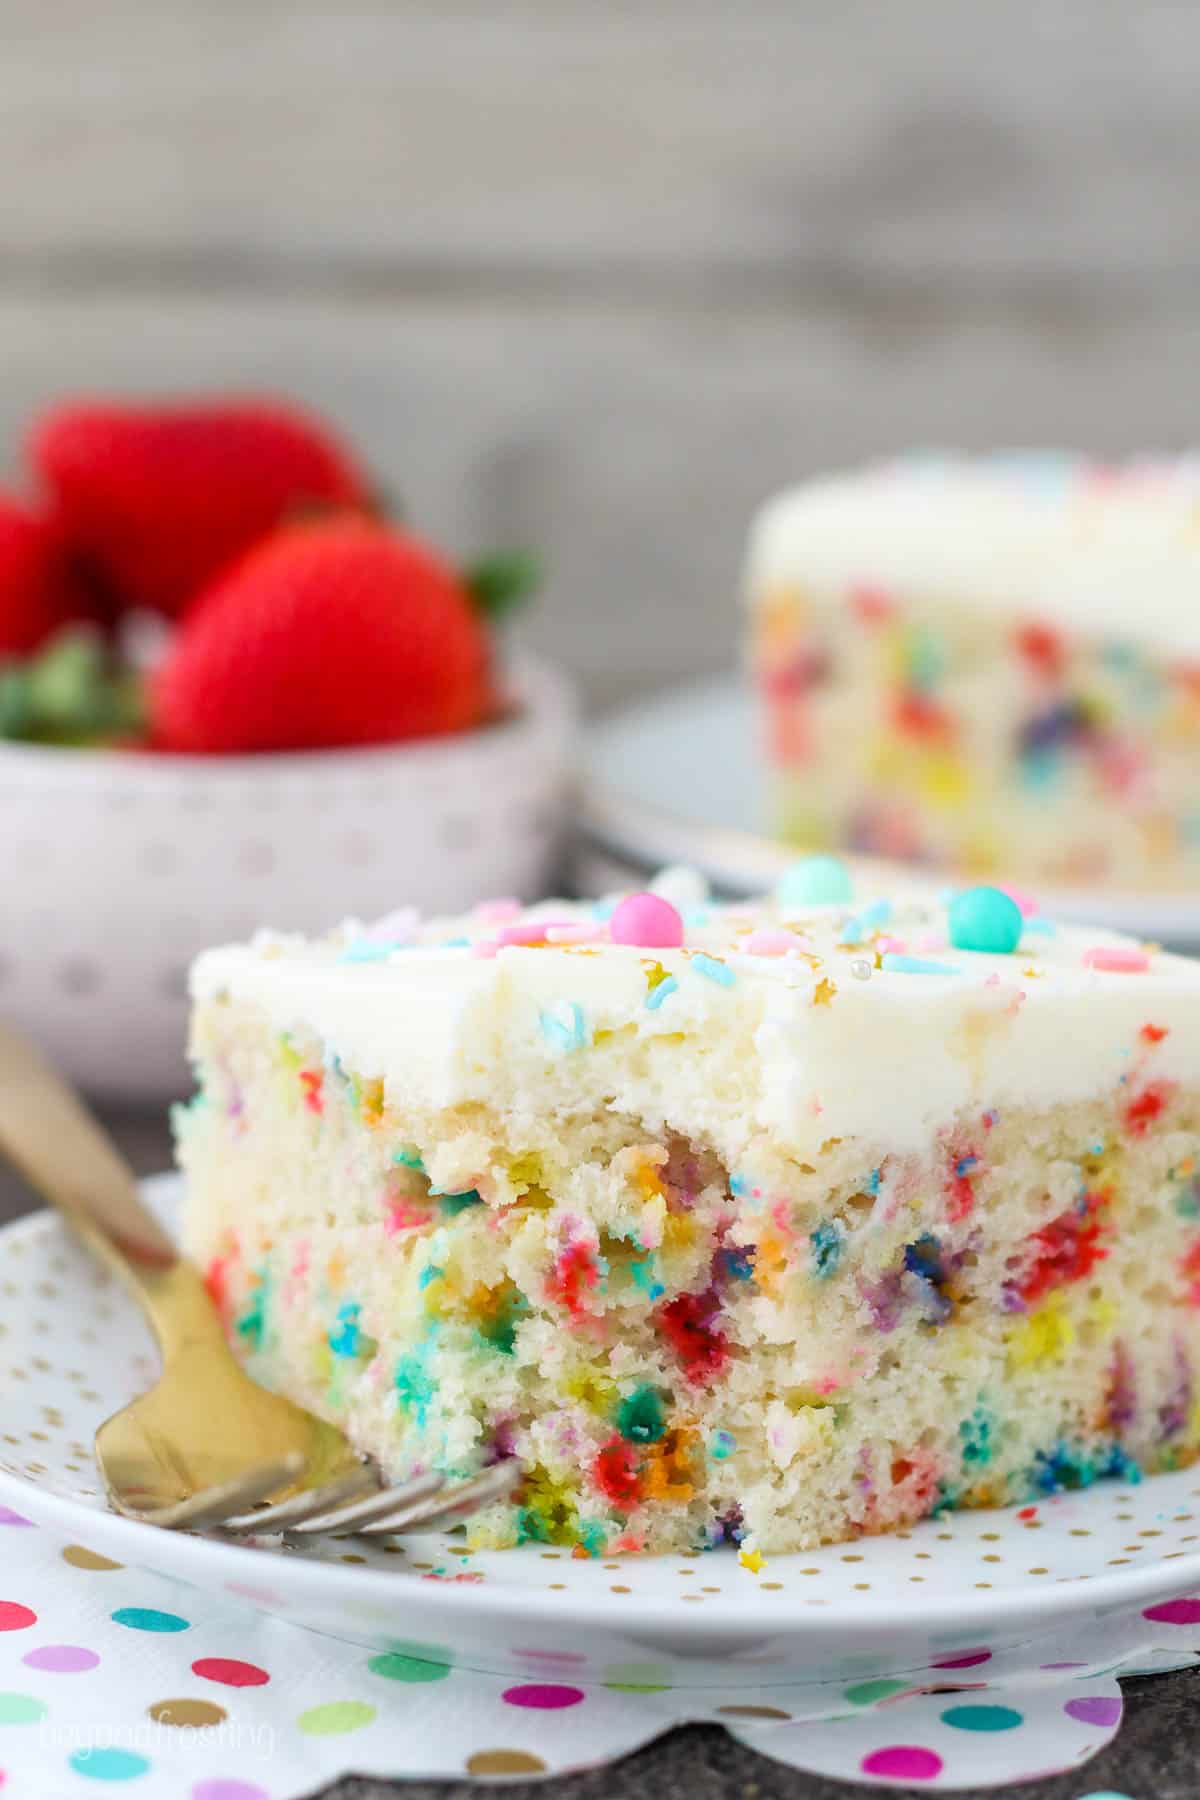 A piece of funfetti cake with a bite taken out of it